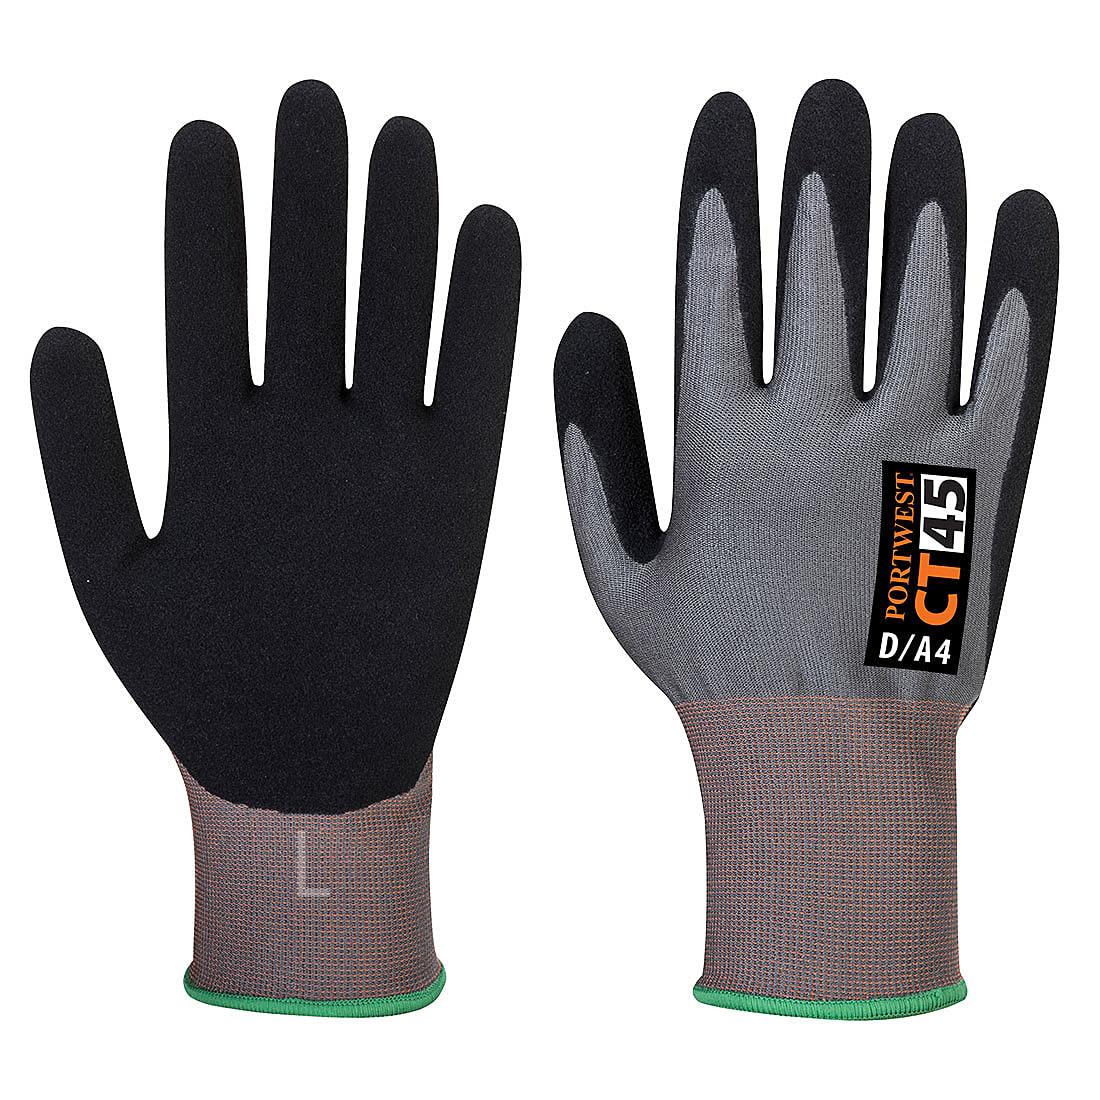 Portwest CT HR Nitrile Foam Gloves in Grey / Black (Product Code: CT45)